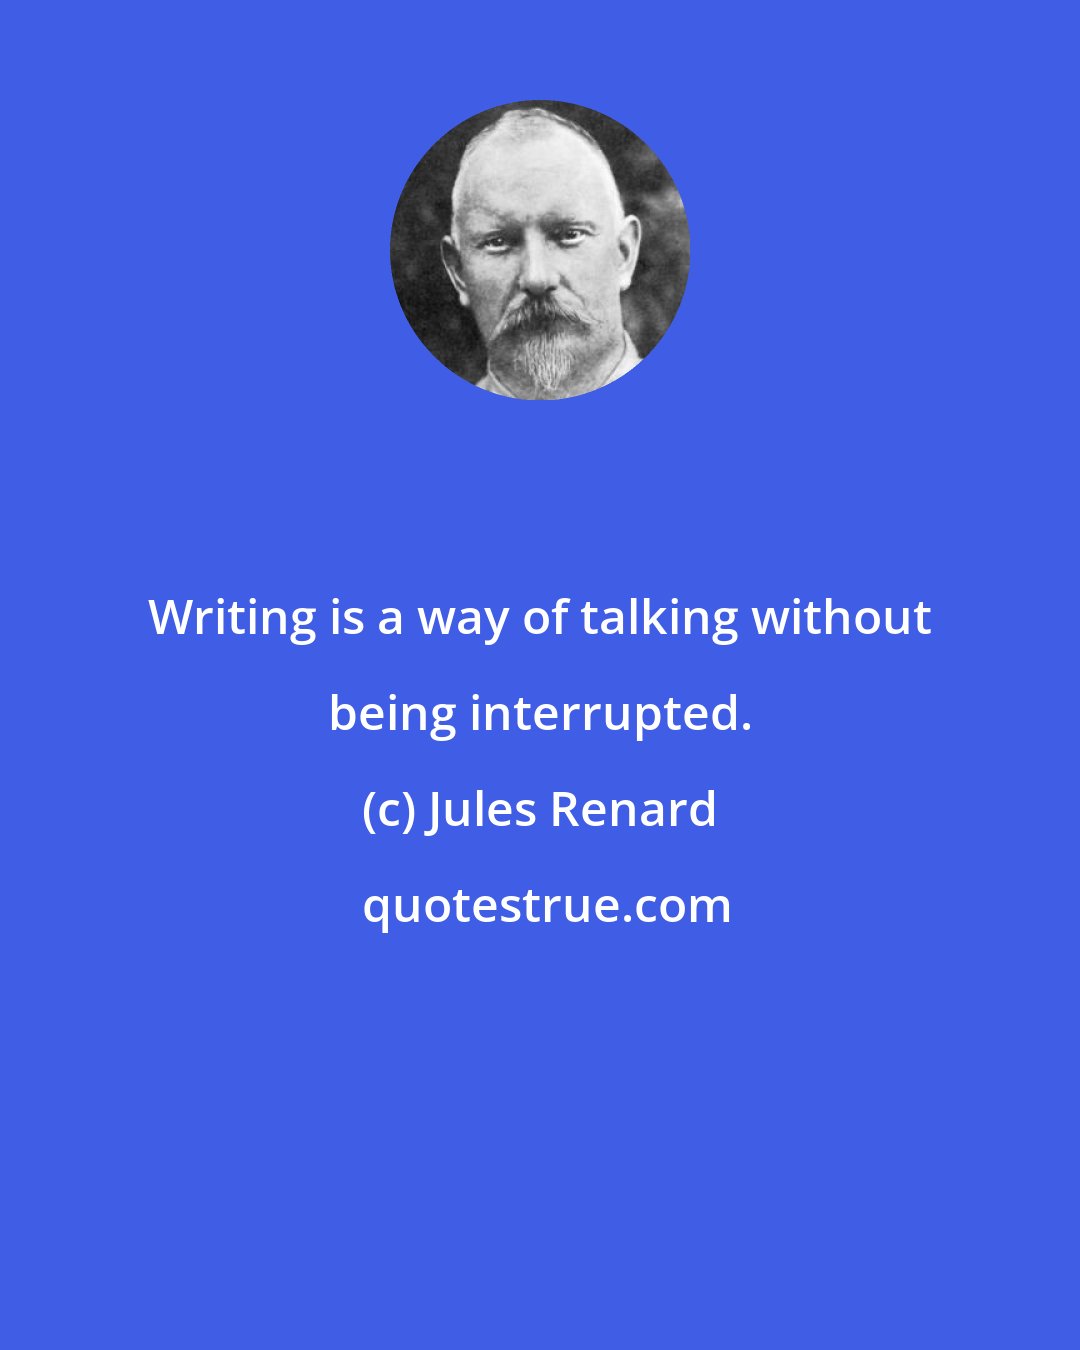 Jules Renard: Writing is a way of talking without being interrupted.